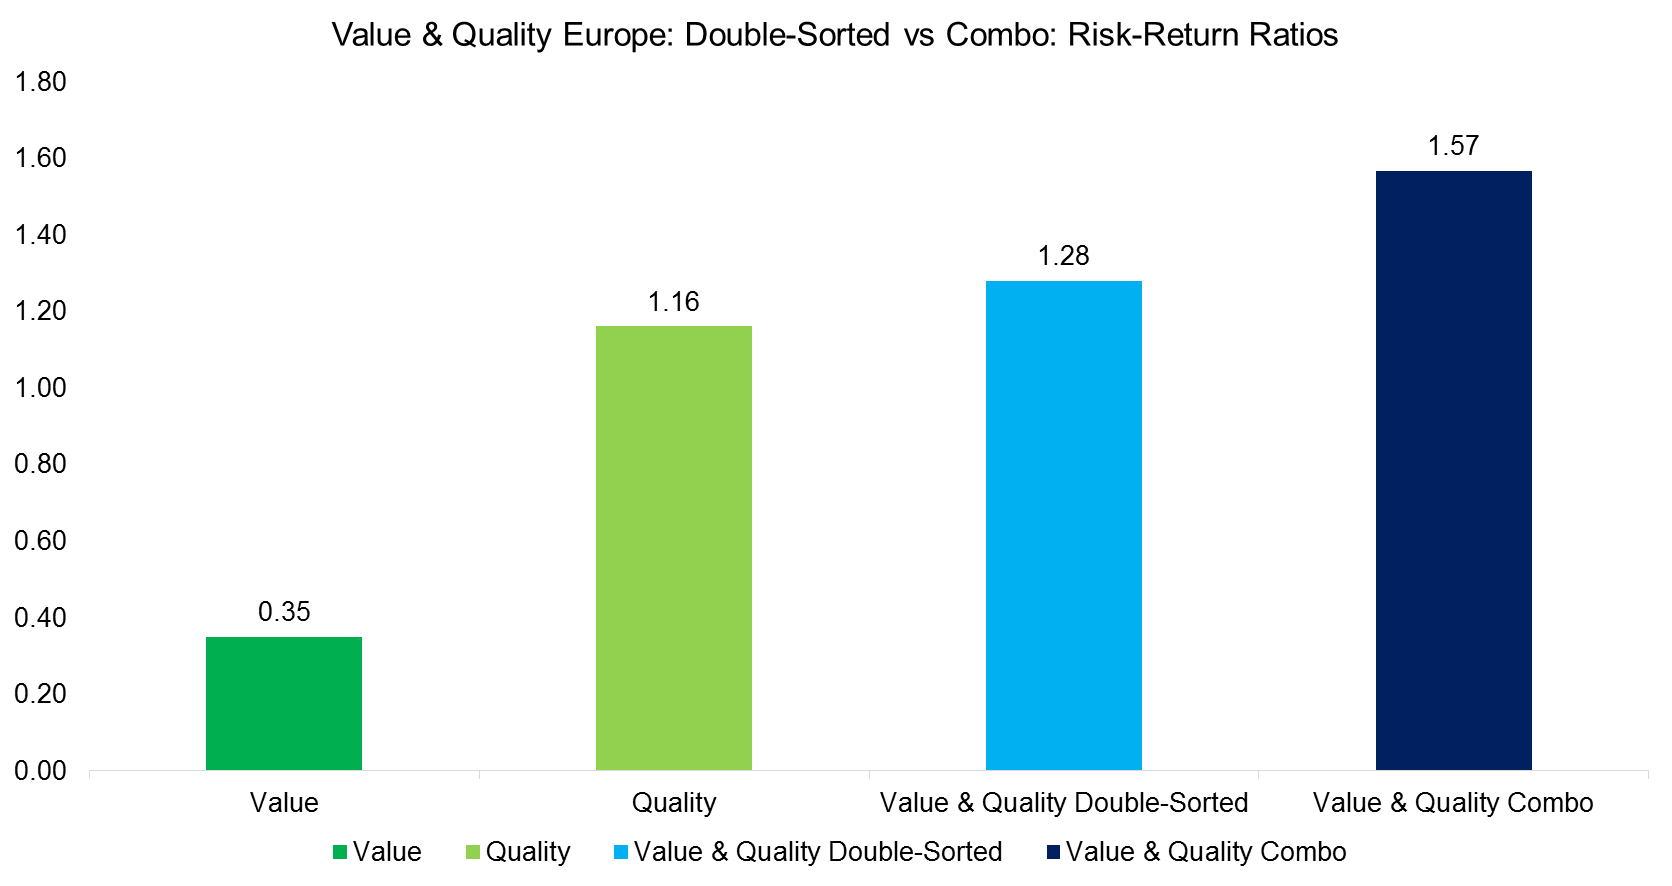 Value & Quality Europe Double-Sorted vs Combo Risk-Return Ratios